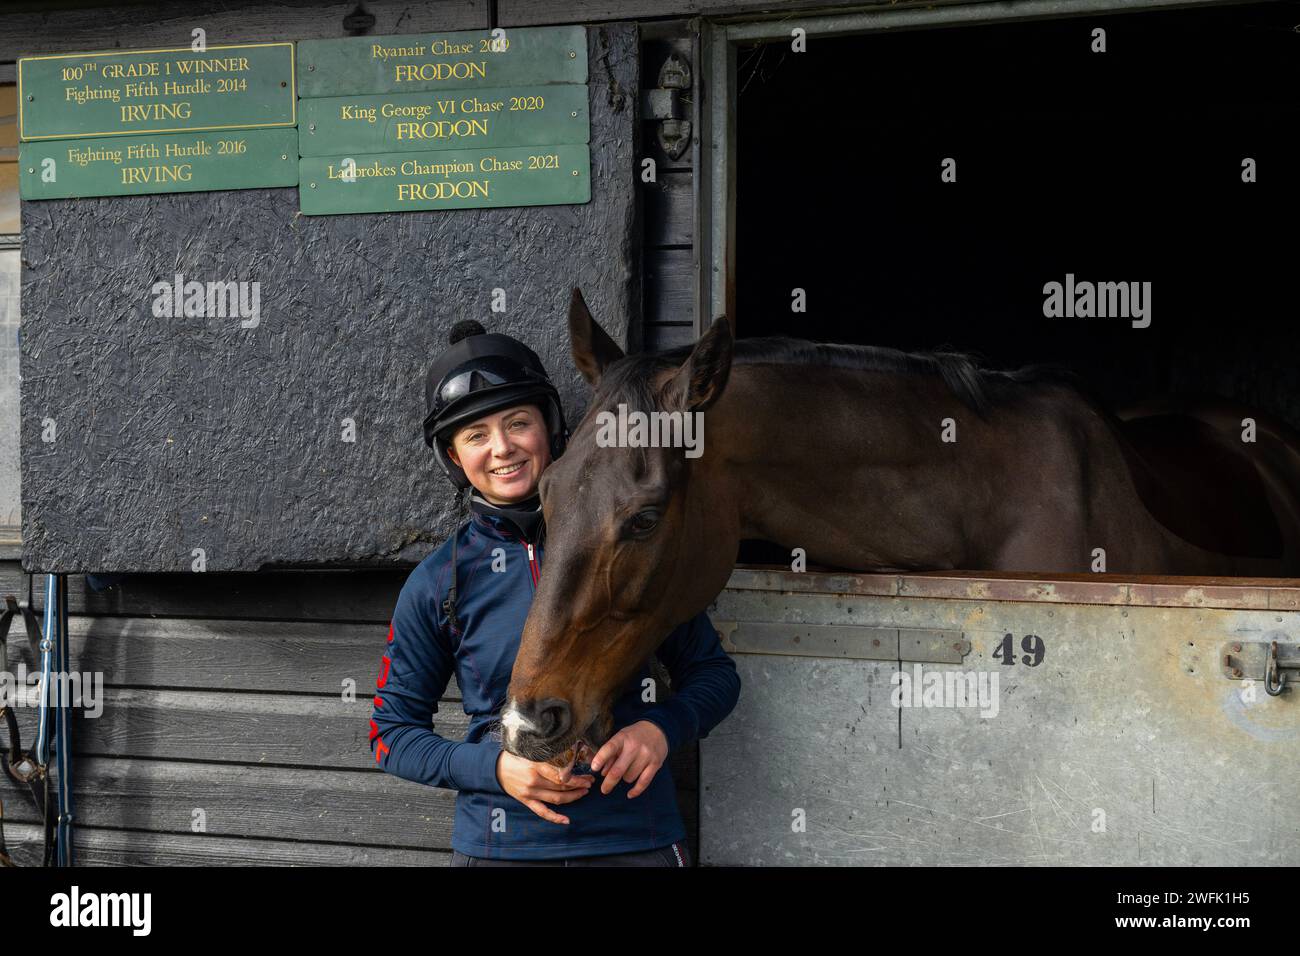 Jockey Bryony Frost with National Hunt race horse Frodon on his last day at Paul Nicholls' yard after his retirement. Stock Photo